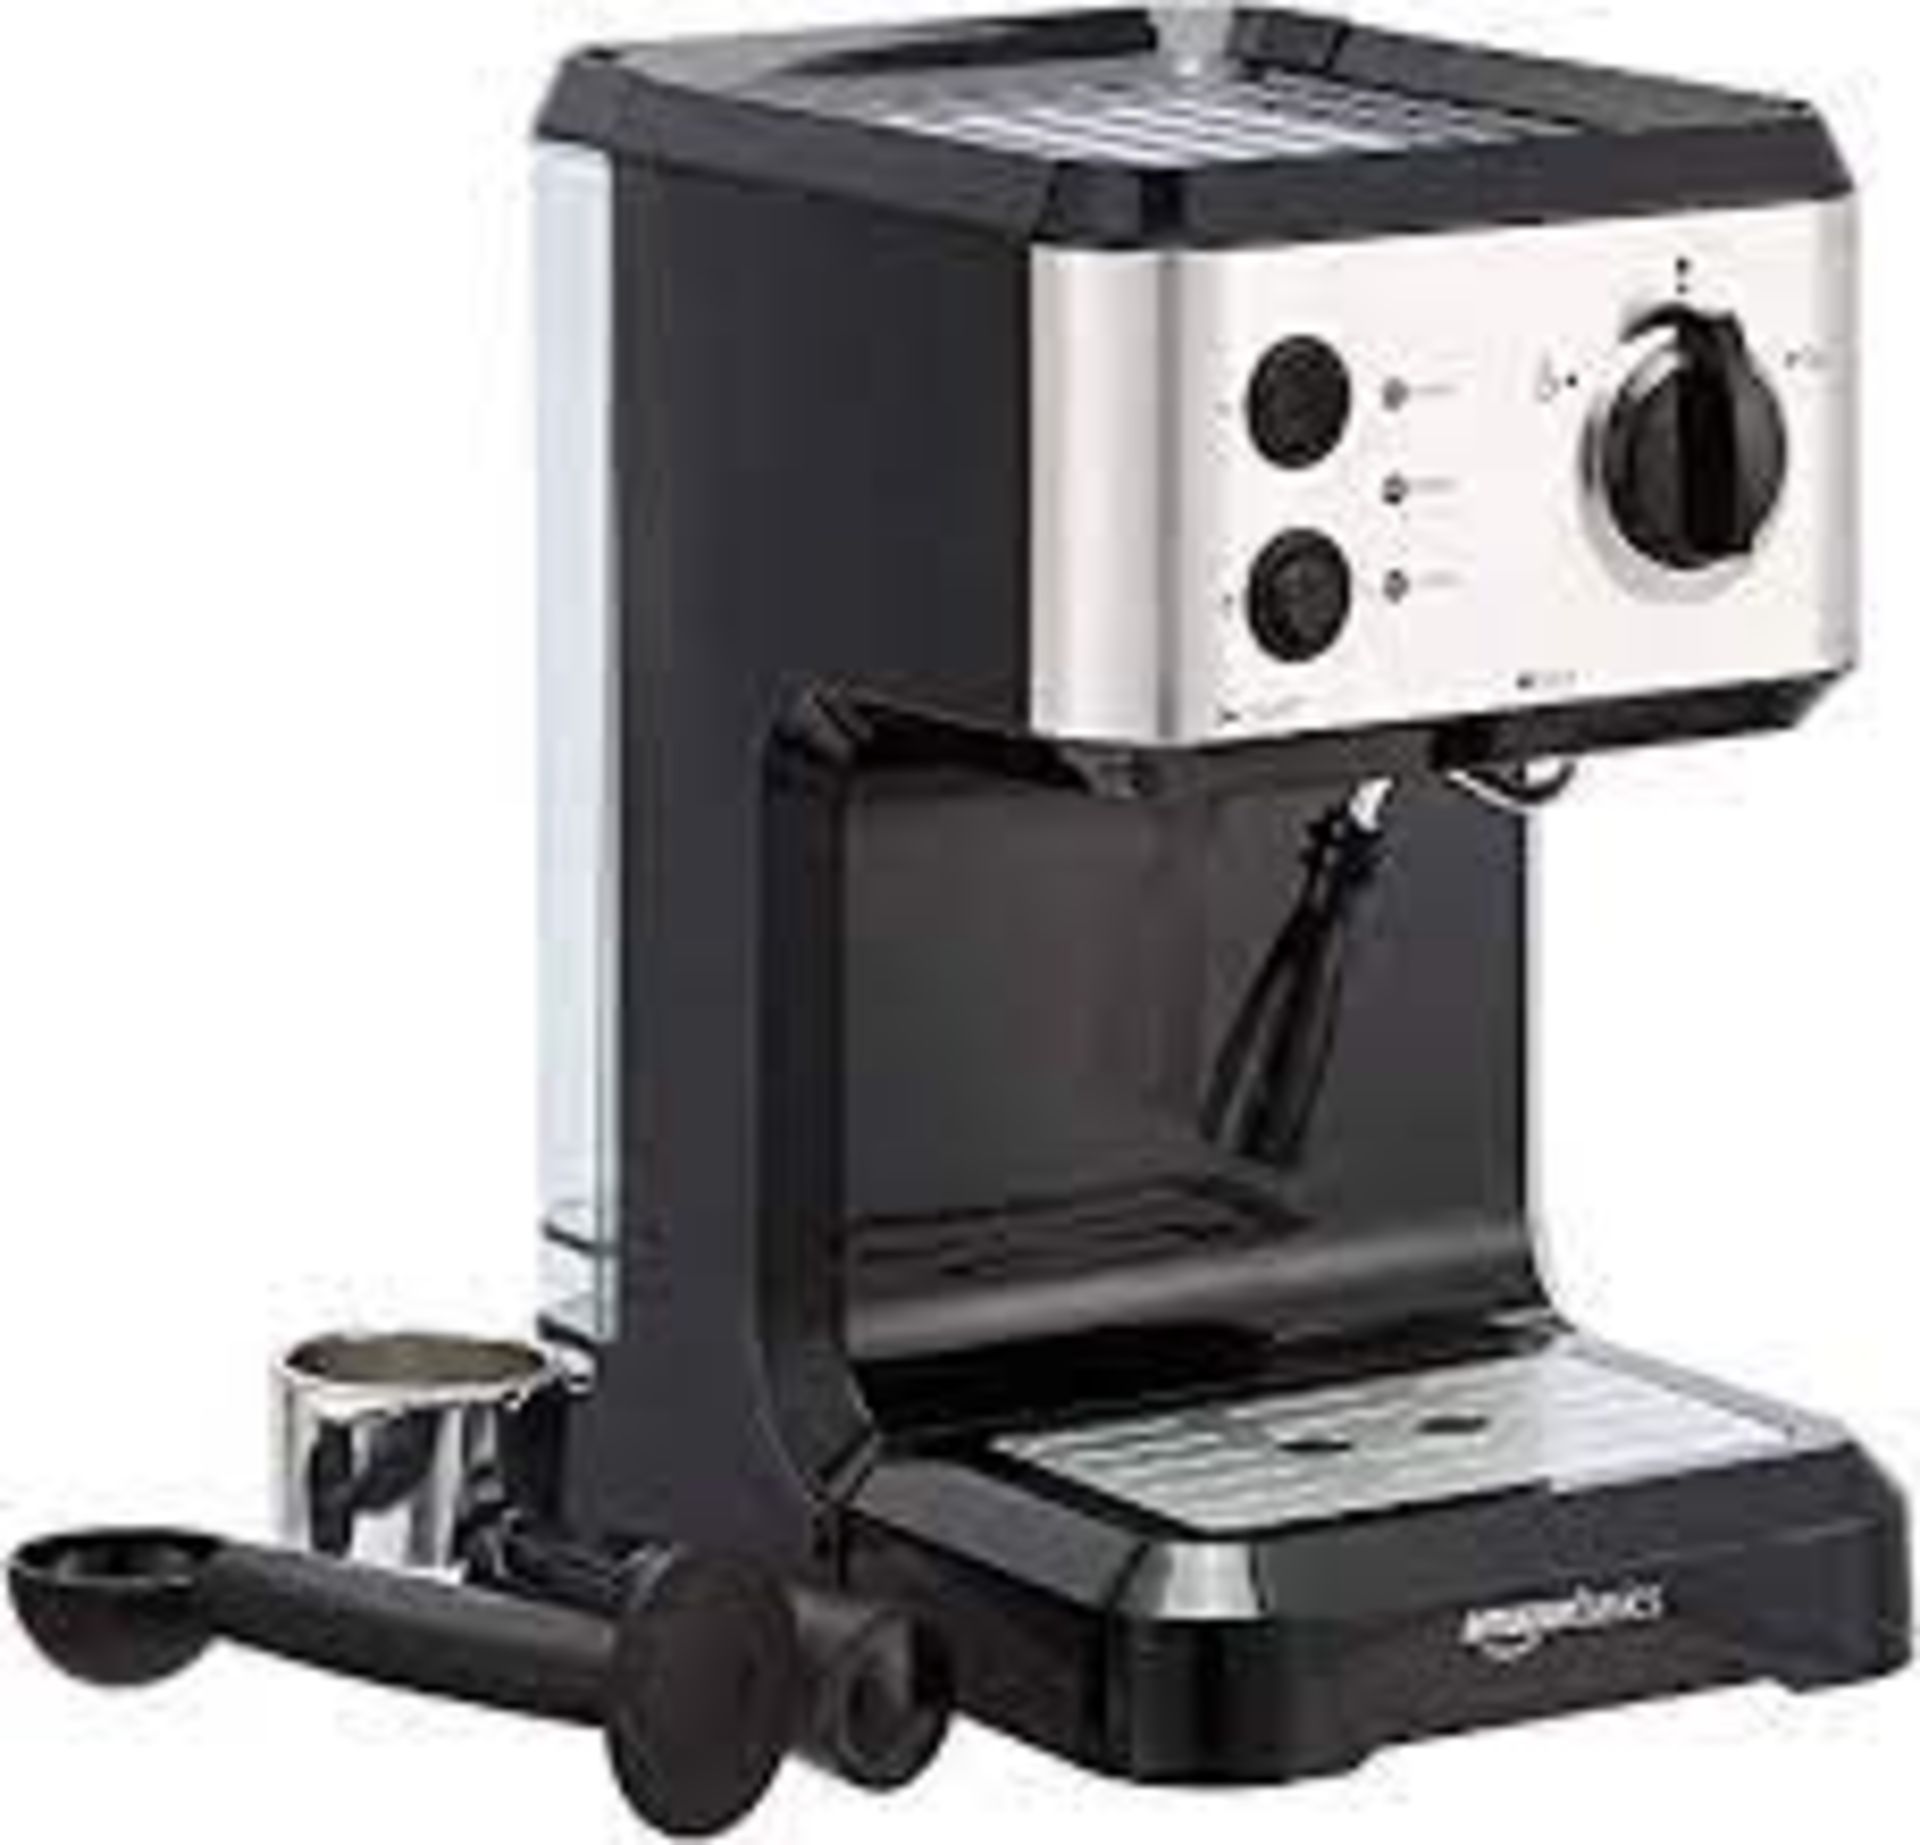 RRP £500 Lot To Contain 5 Boxed Brand New Amazon Basics Espresso Coffee Machines With Milk Frothers